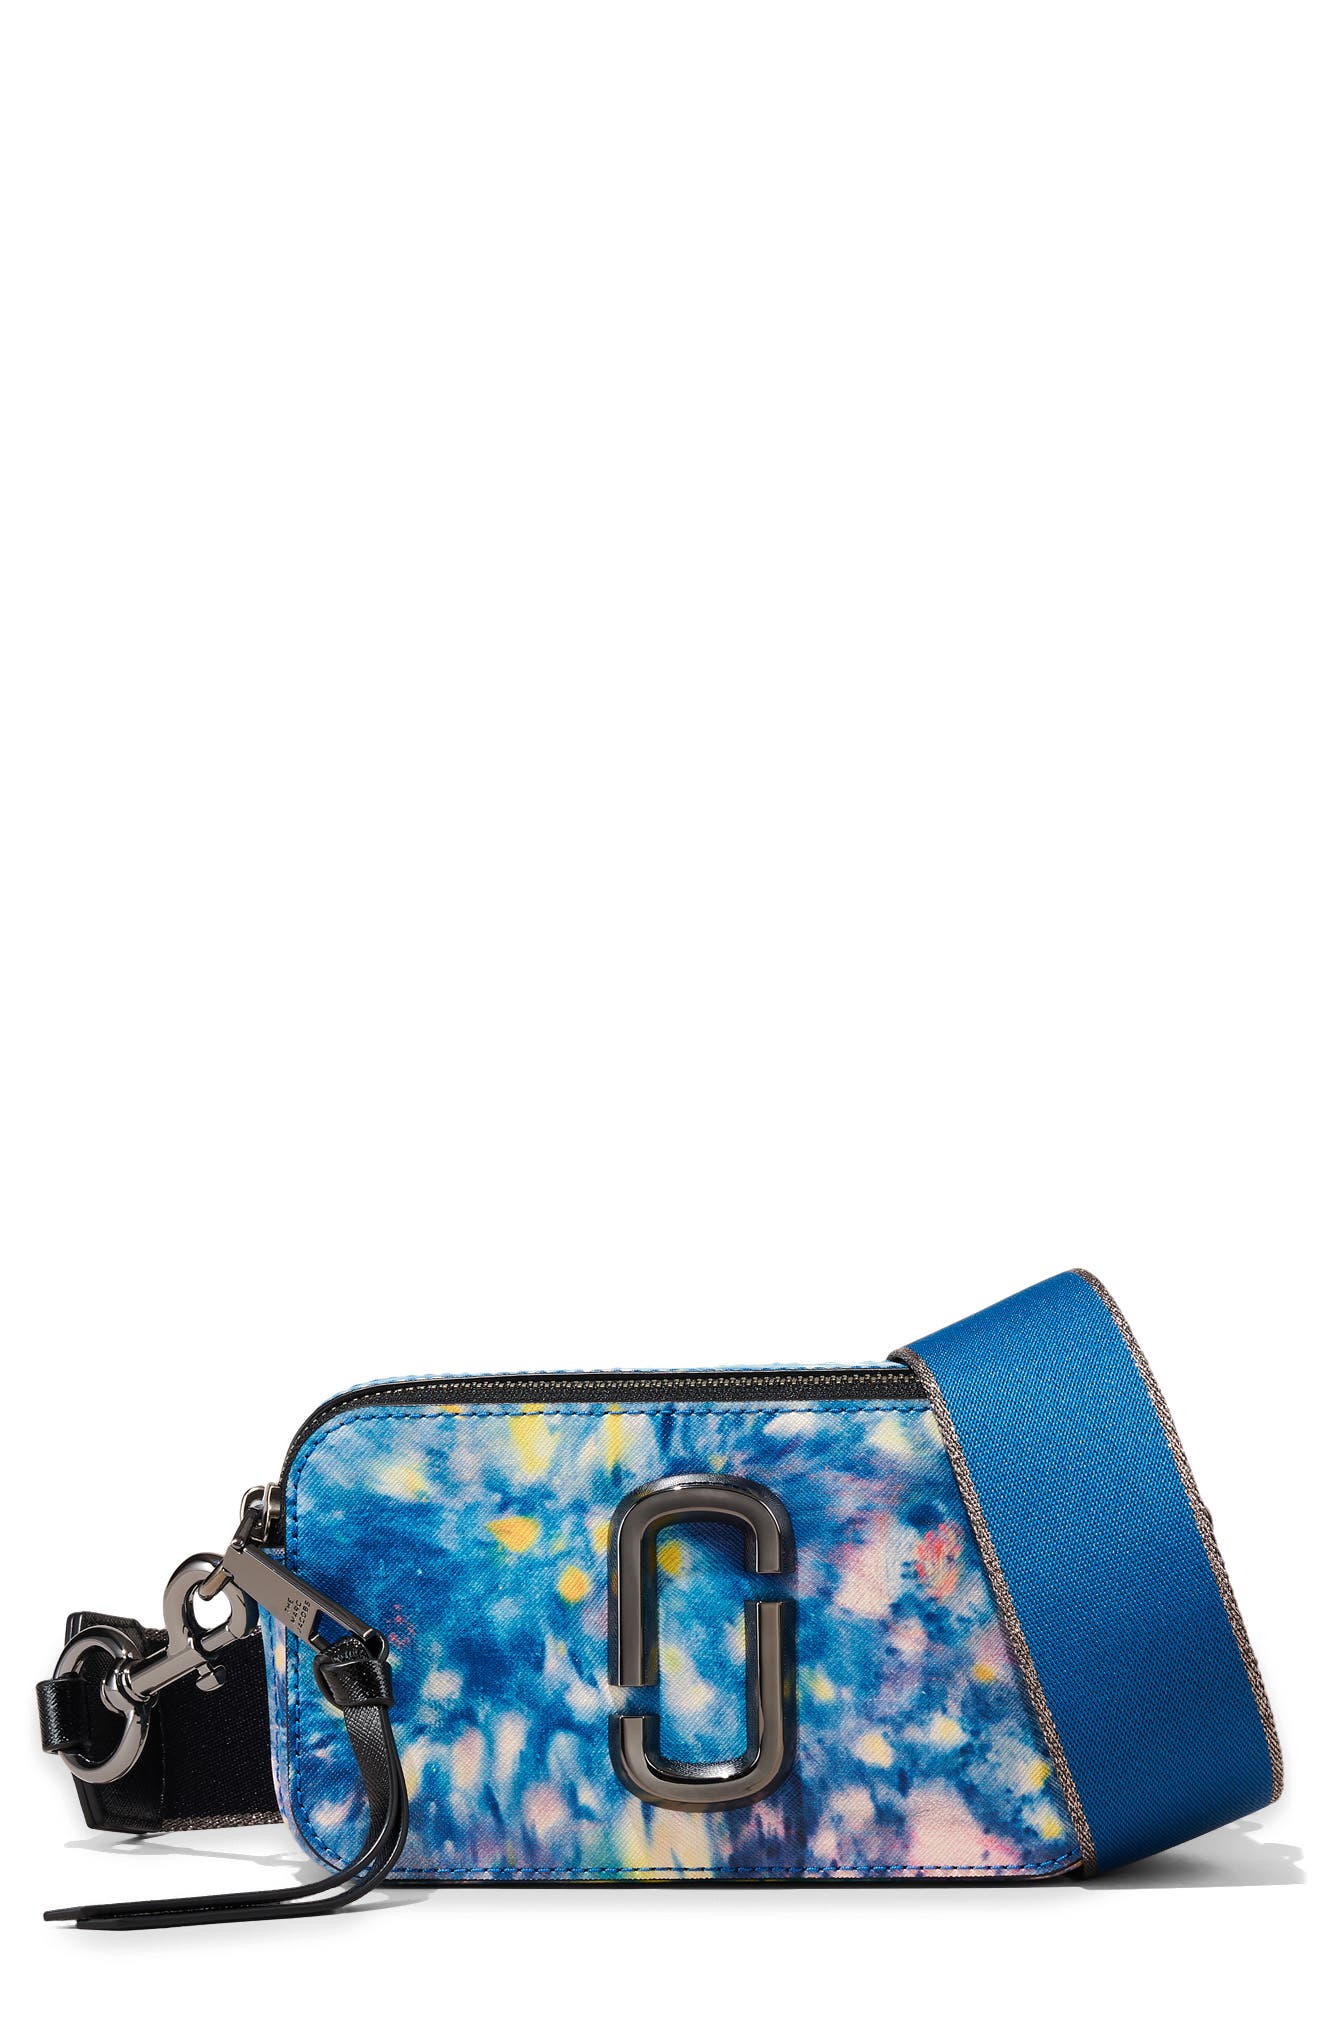 Cross body bags Marc Jacobs - Snapshot blue saffiano leather